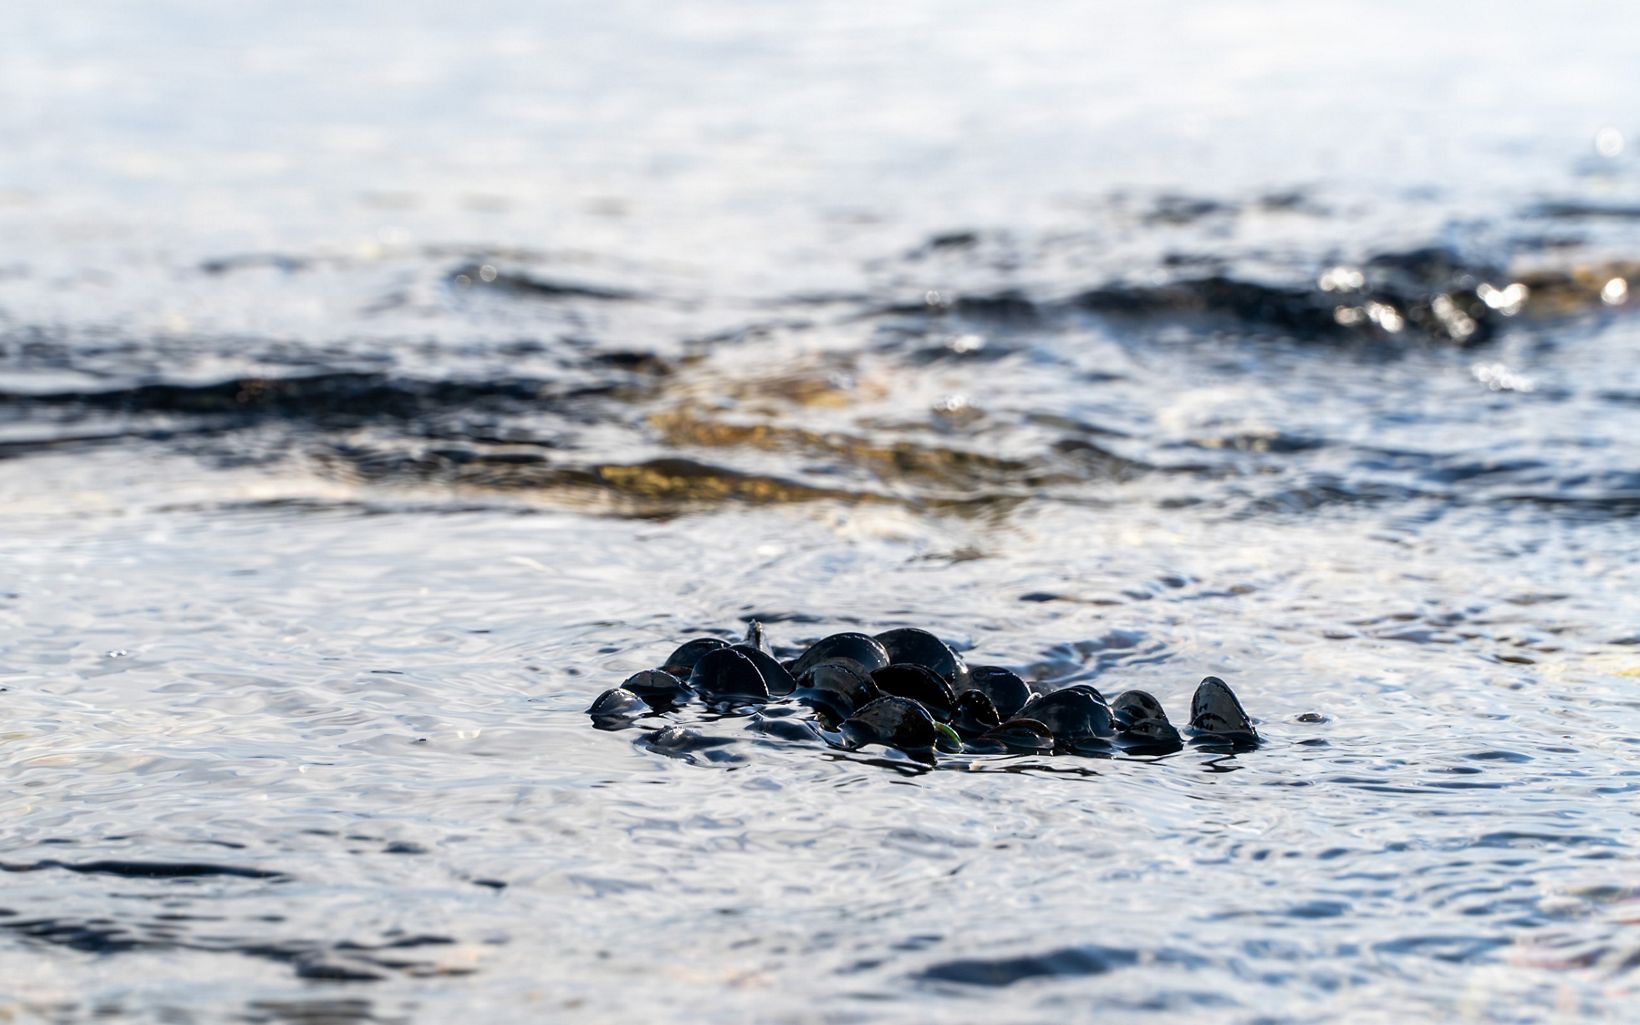 Submerged Mussel beds surrounding Otata are submerged under the incoming tide. © Ethan Kearns/The Nature Conservancy